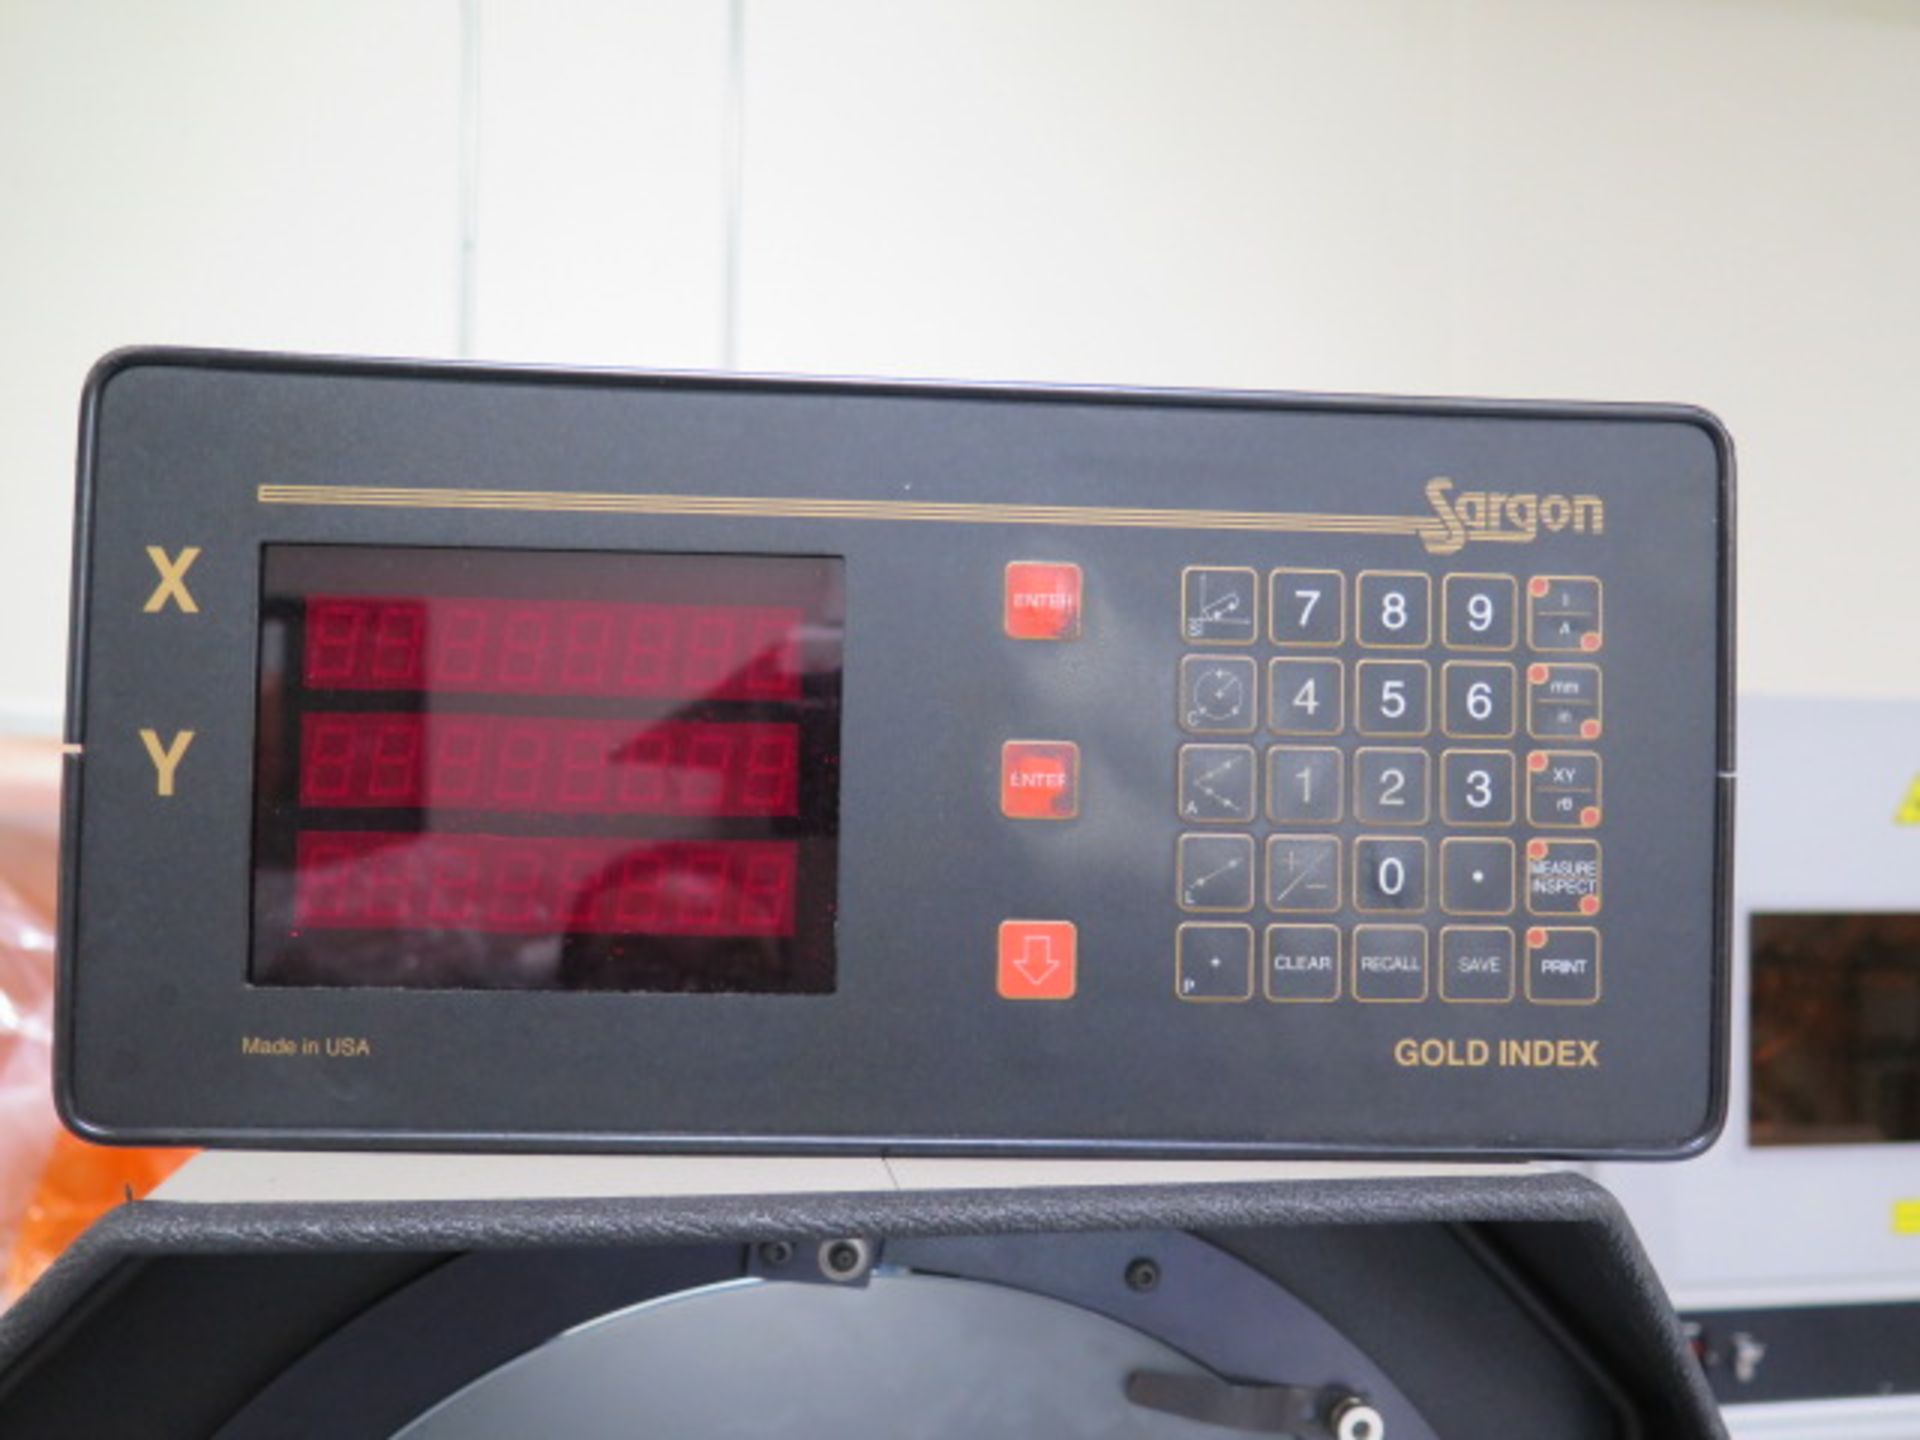 MicroVu mdl. H-14 14” Optical Comparator s/n 3328 w/ Sargon DRO, Surface and Profile, SOLD AS IS - Image 7 of 9